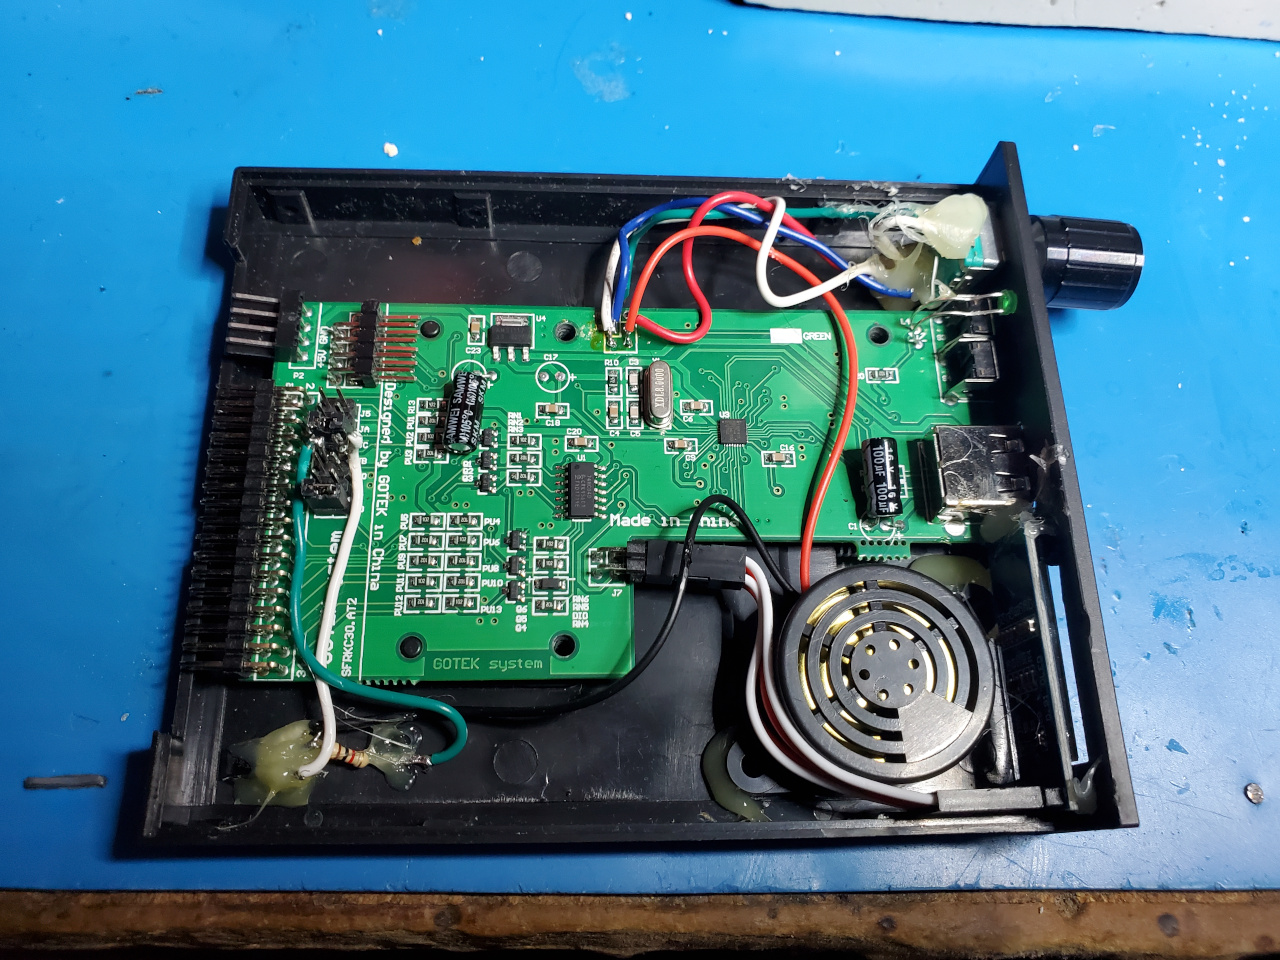 Top view of the inside of one of our modified Gotek floppy emulators.